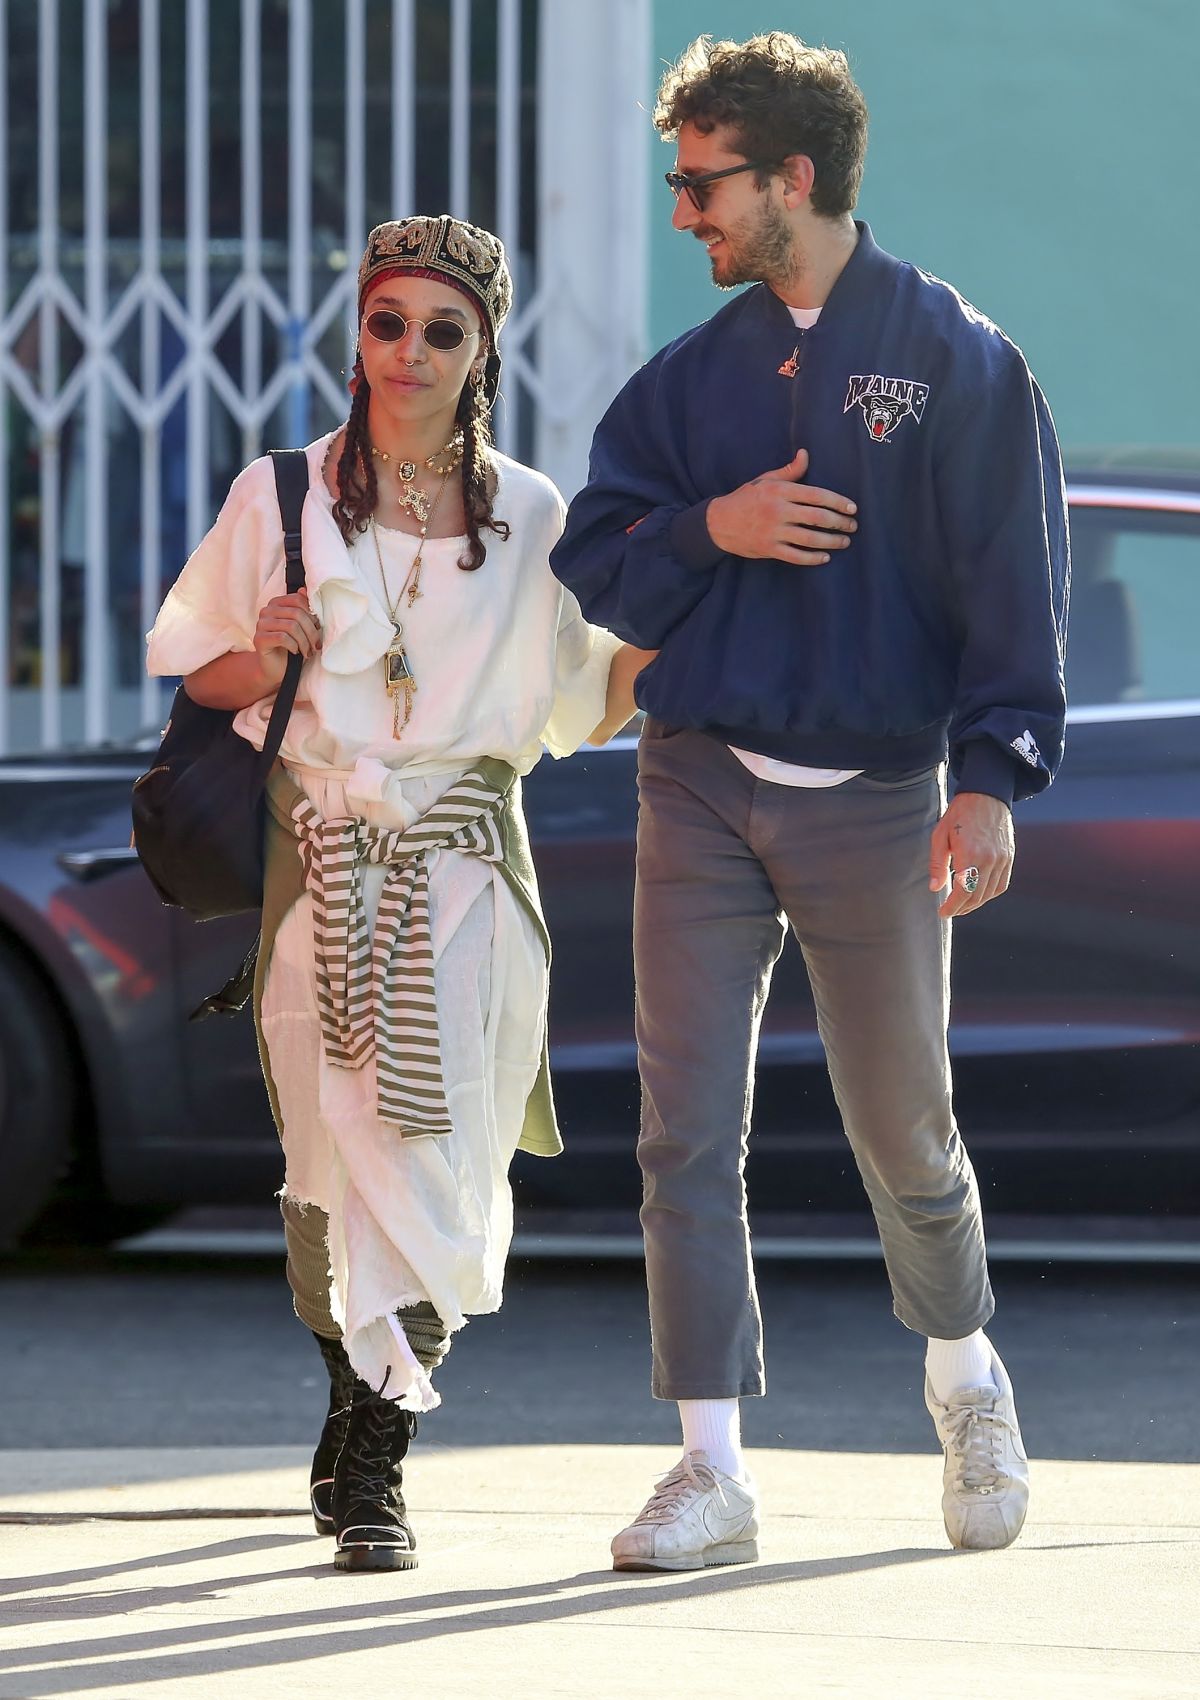 FKA TWIGS and Shia Labeouf Out Shopping in Los Angeles 04/29/2019 - HawtCelebs1200 x 1700